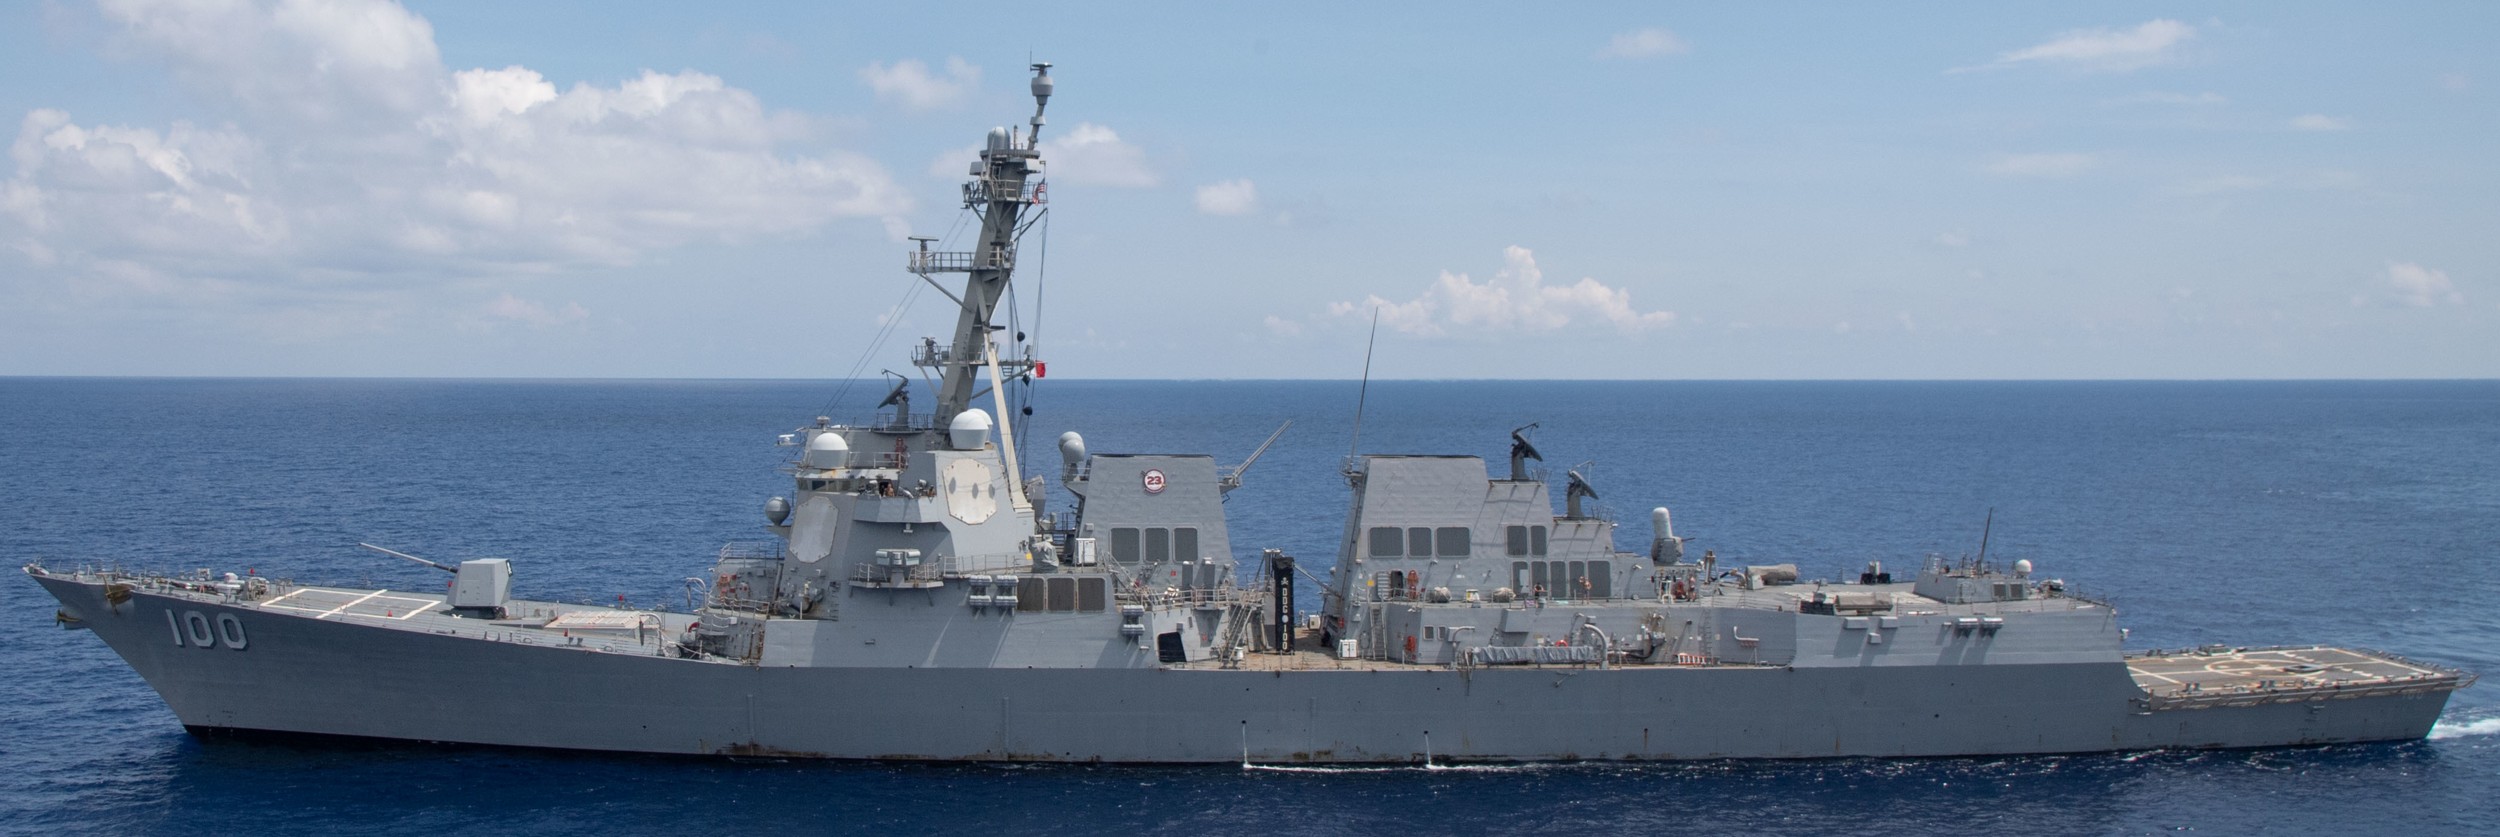 ddg-100 uss kidd arleigh burke class guided missile destroyer aegis us navy south china sea 63